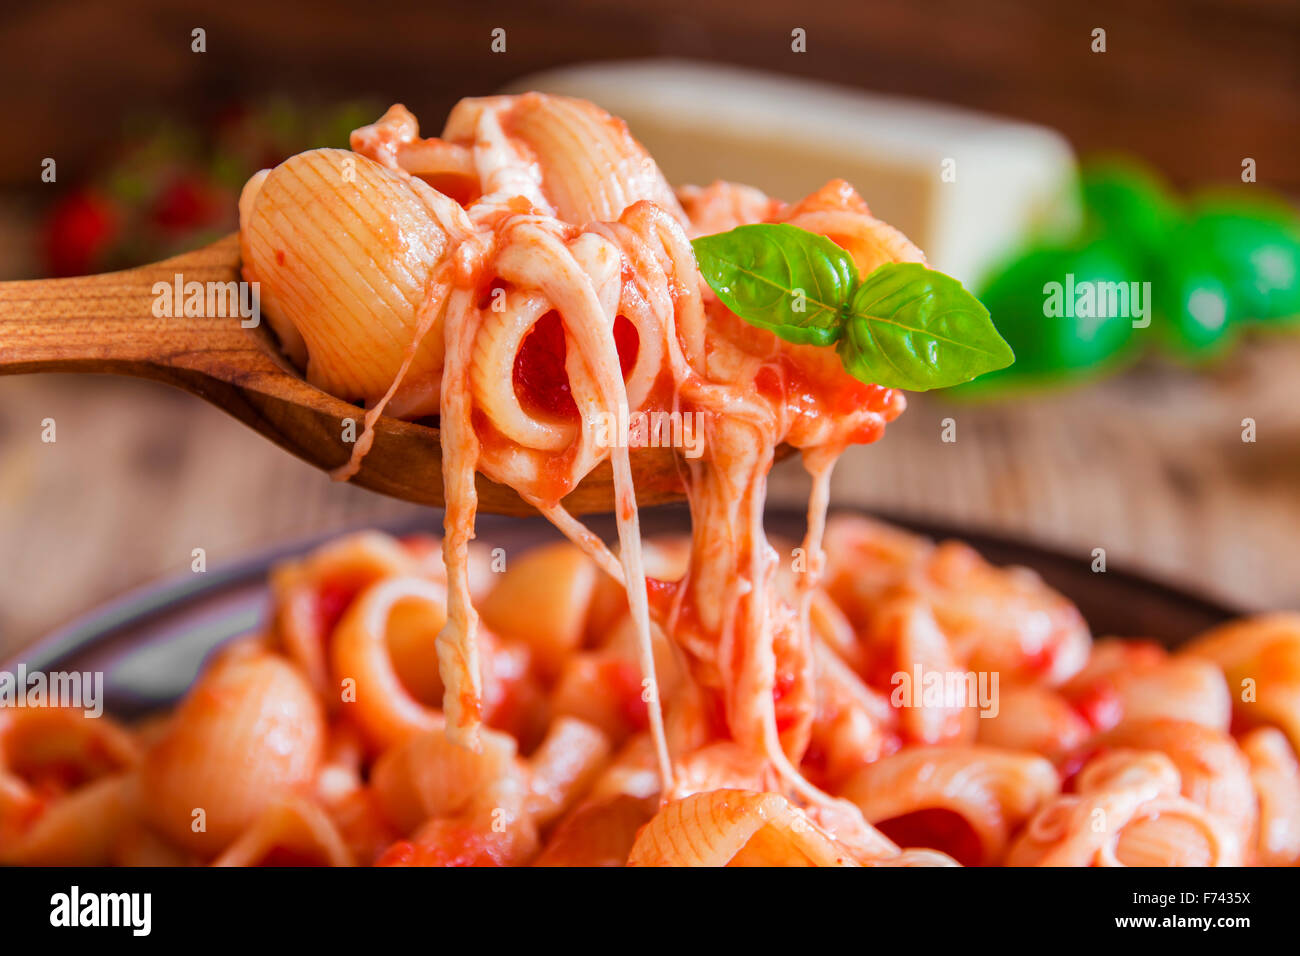 pasta with tomato sauce and cheese Stock Photo